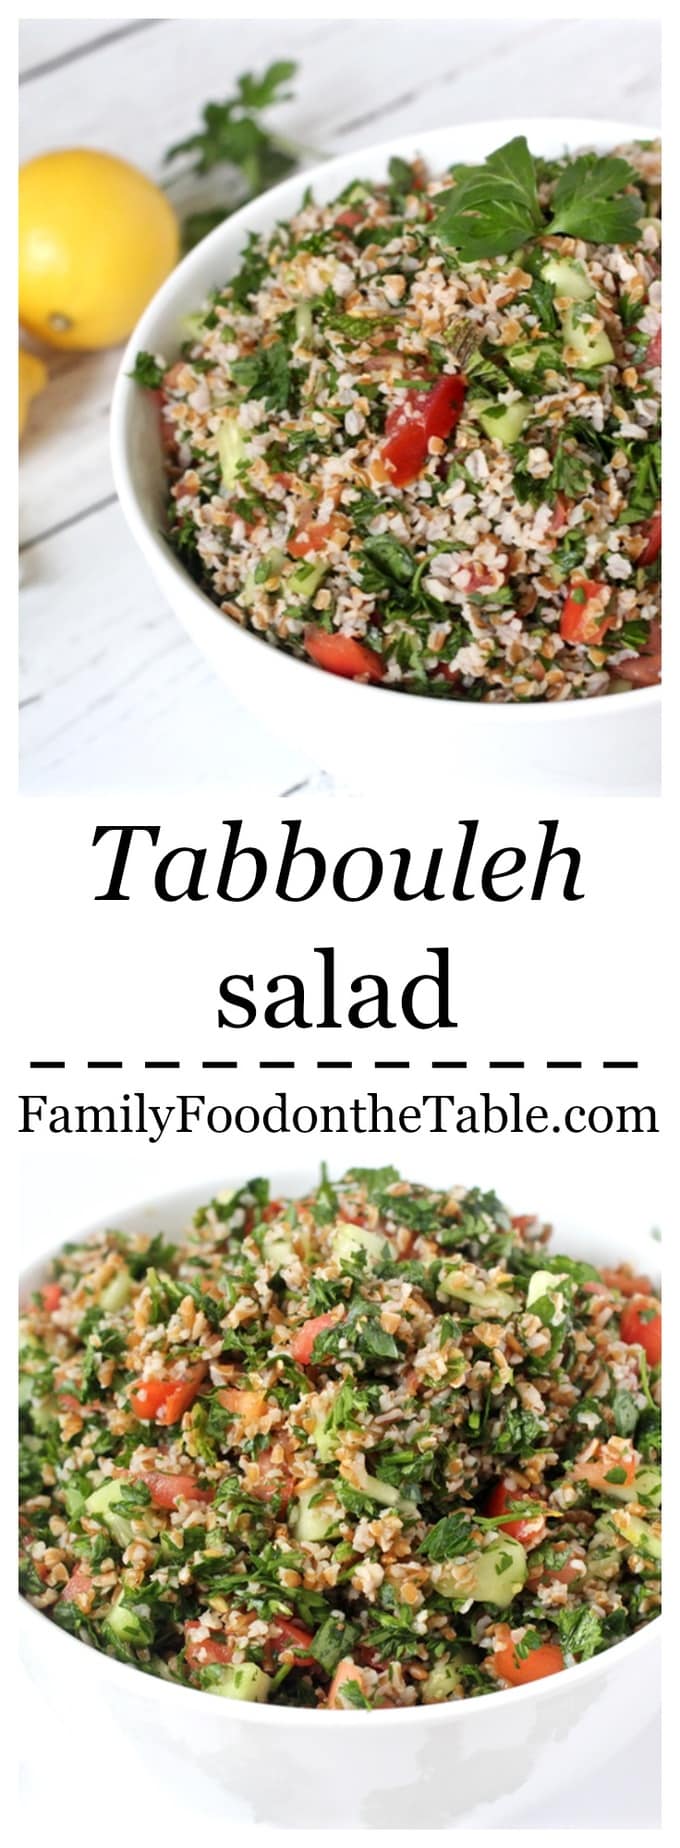 An easy tabbouleh salad with bright, fresh flavors from the parsley, mint and lemon